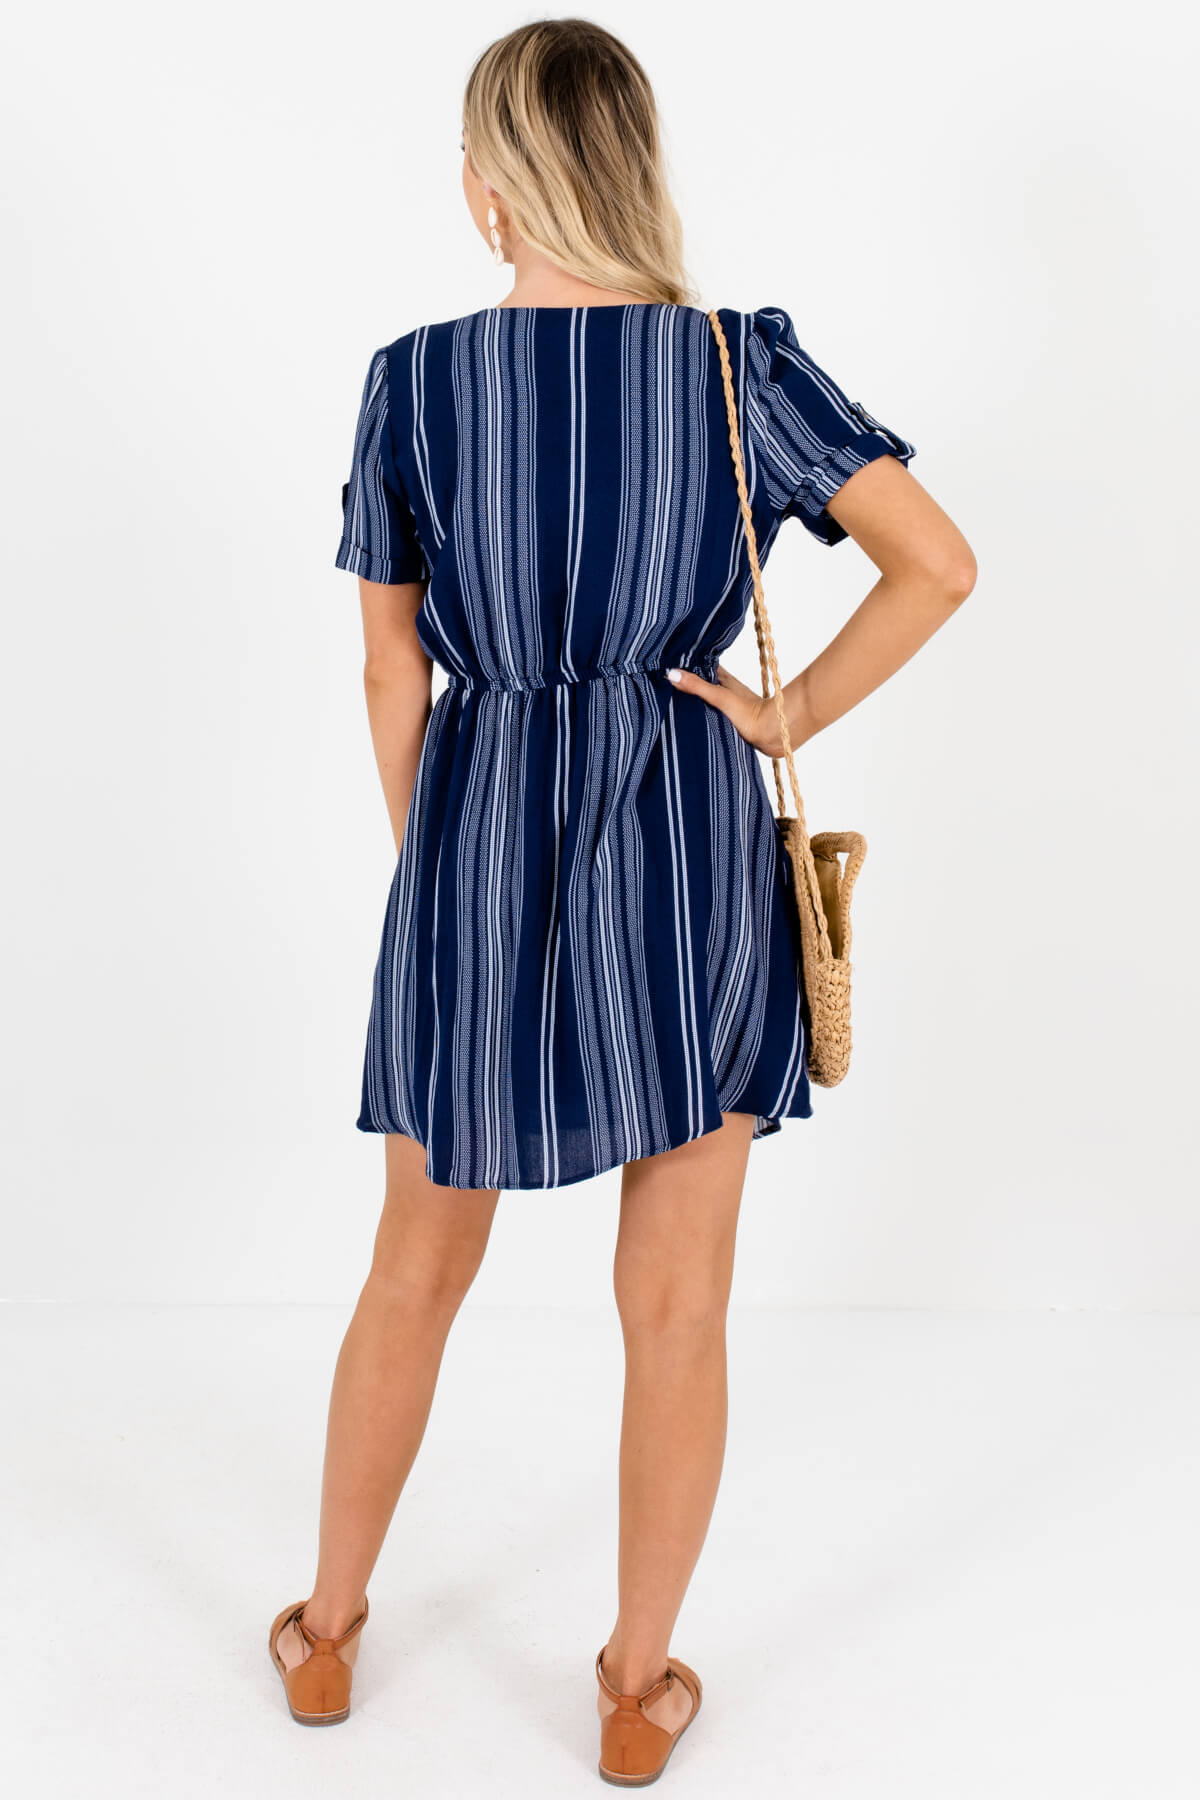 Navy White Striped Decorative Button Mini Dresses with Pockets